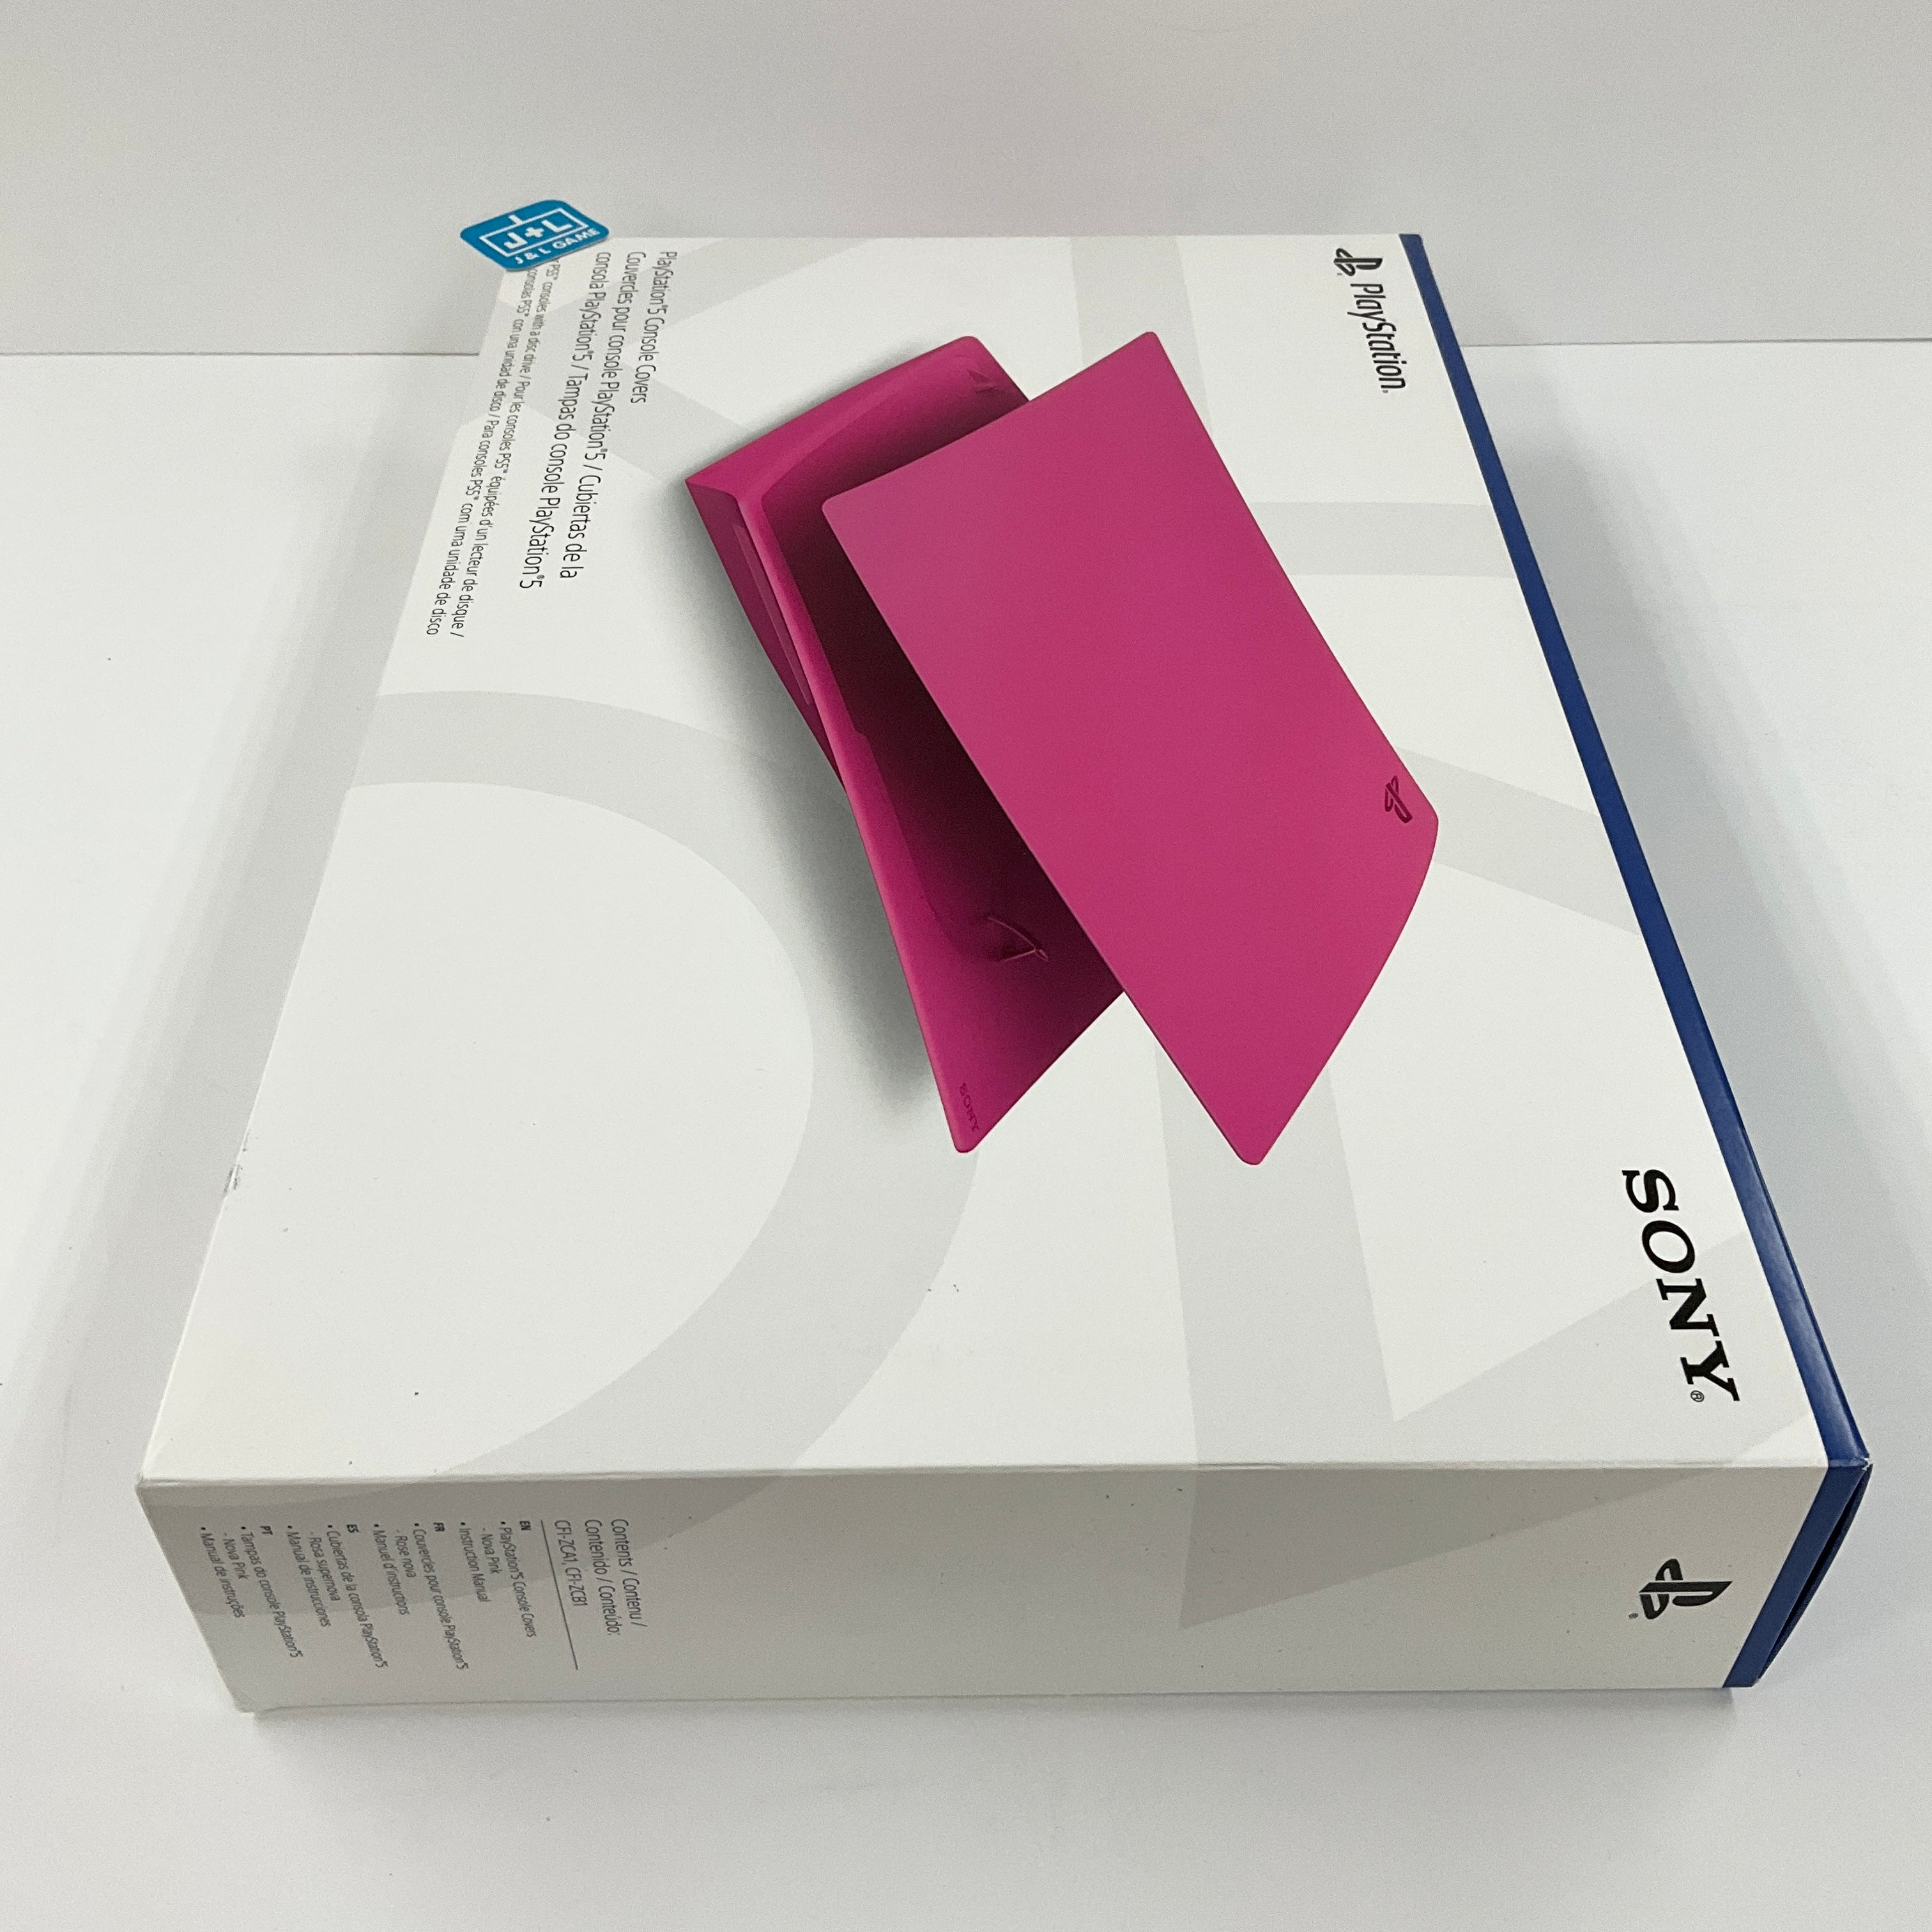 Sony PlayStation 5 DISC Console Cover (Nova Pink)  - (PS5) Playstation 5 Accessories SONY   